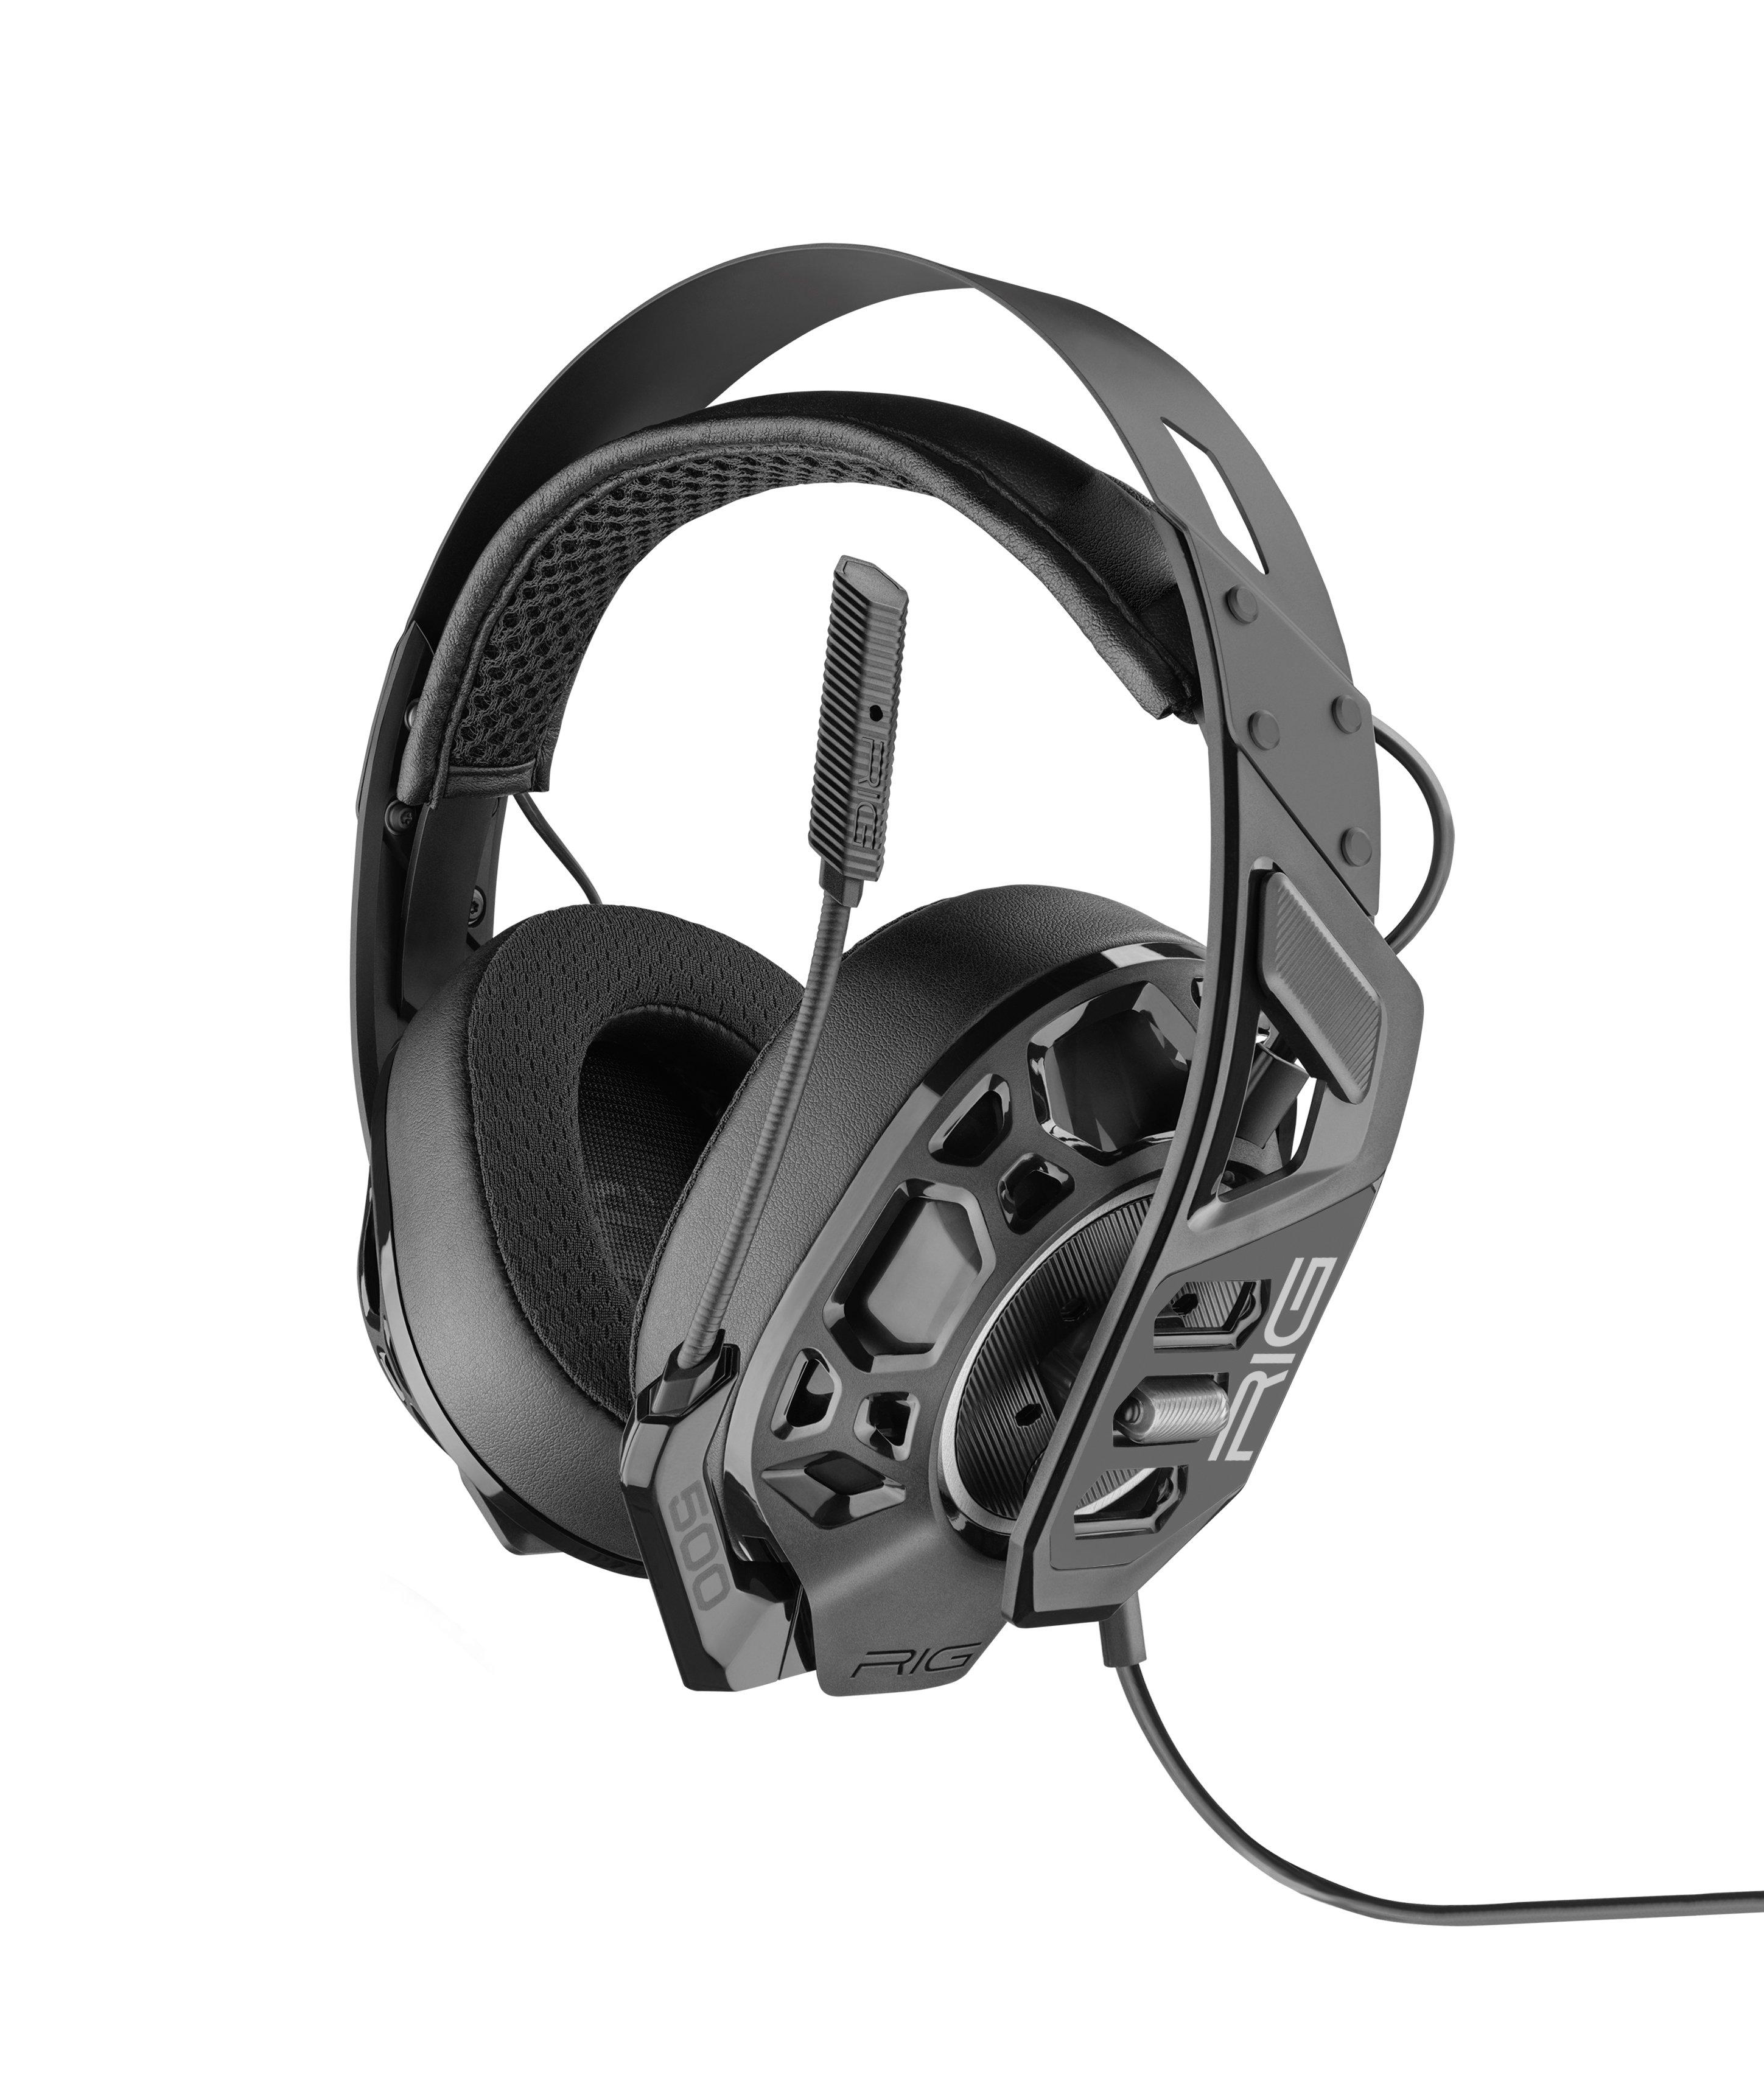 RIG 500 PRO HC Black Headset with Dolby Atmos GameStop